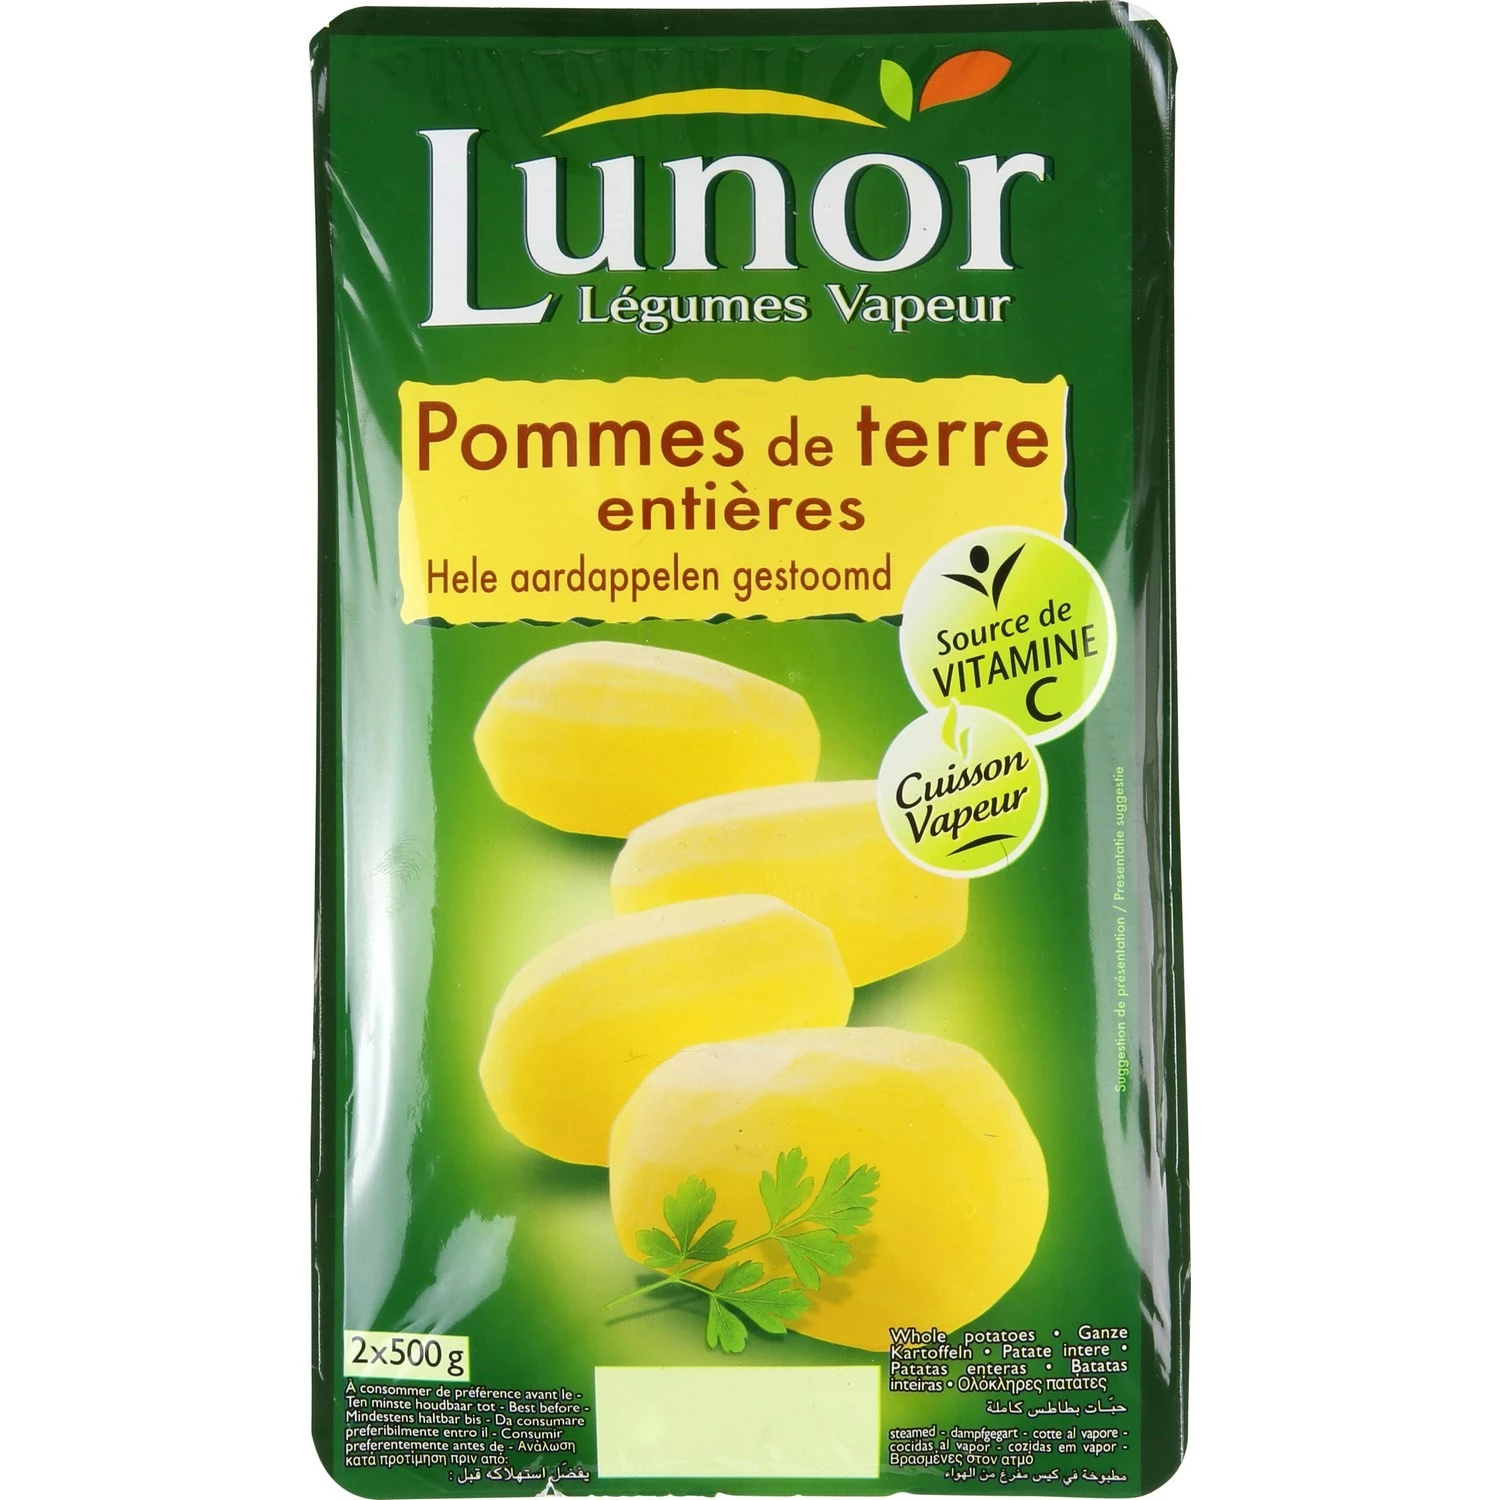 Lunor Whole pre-cooked Potatoes 2x500g